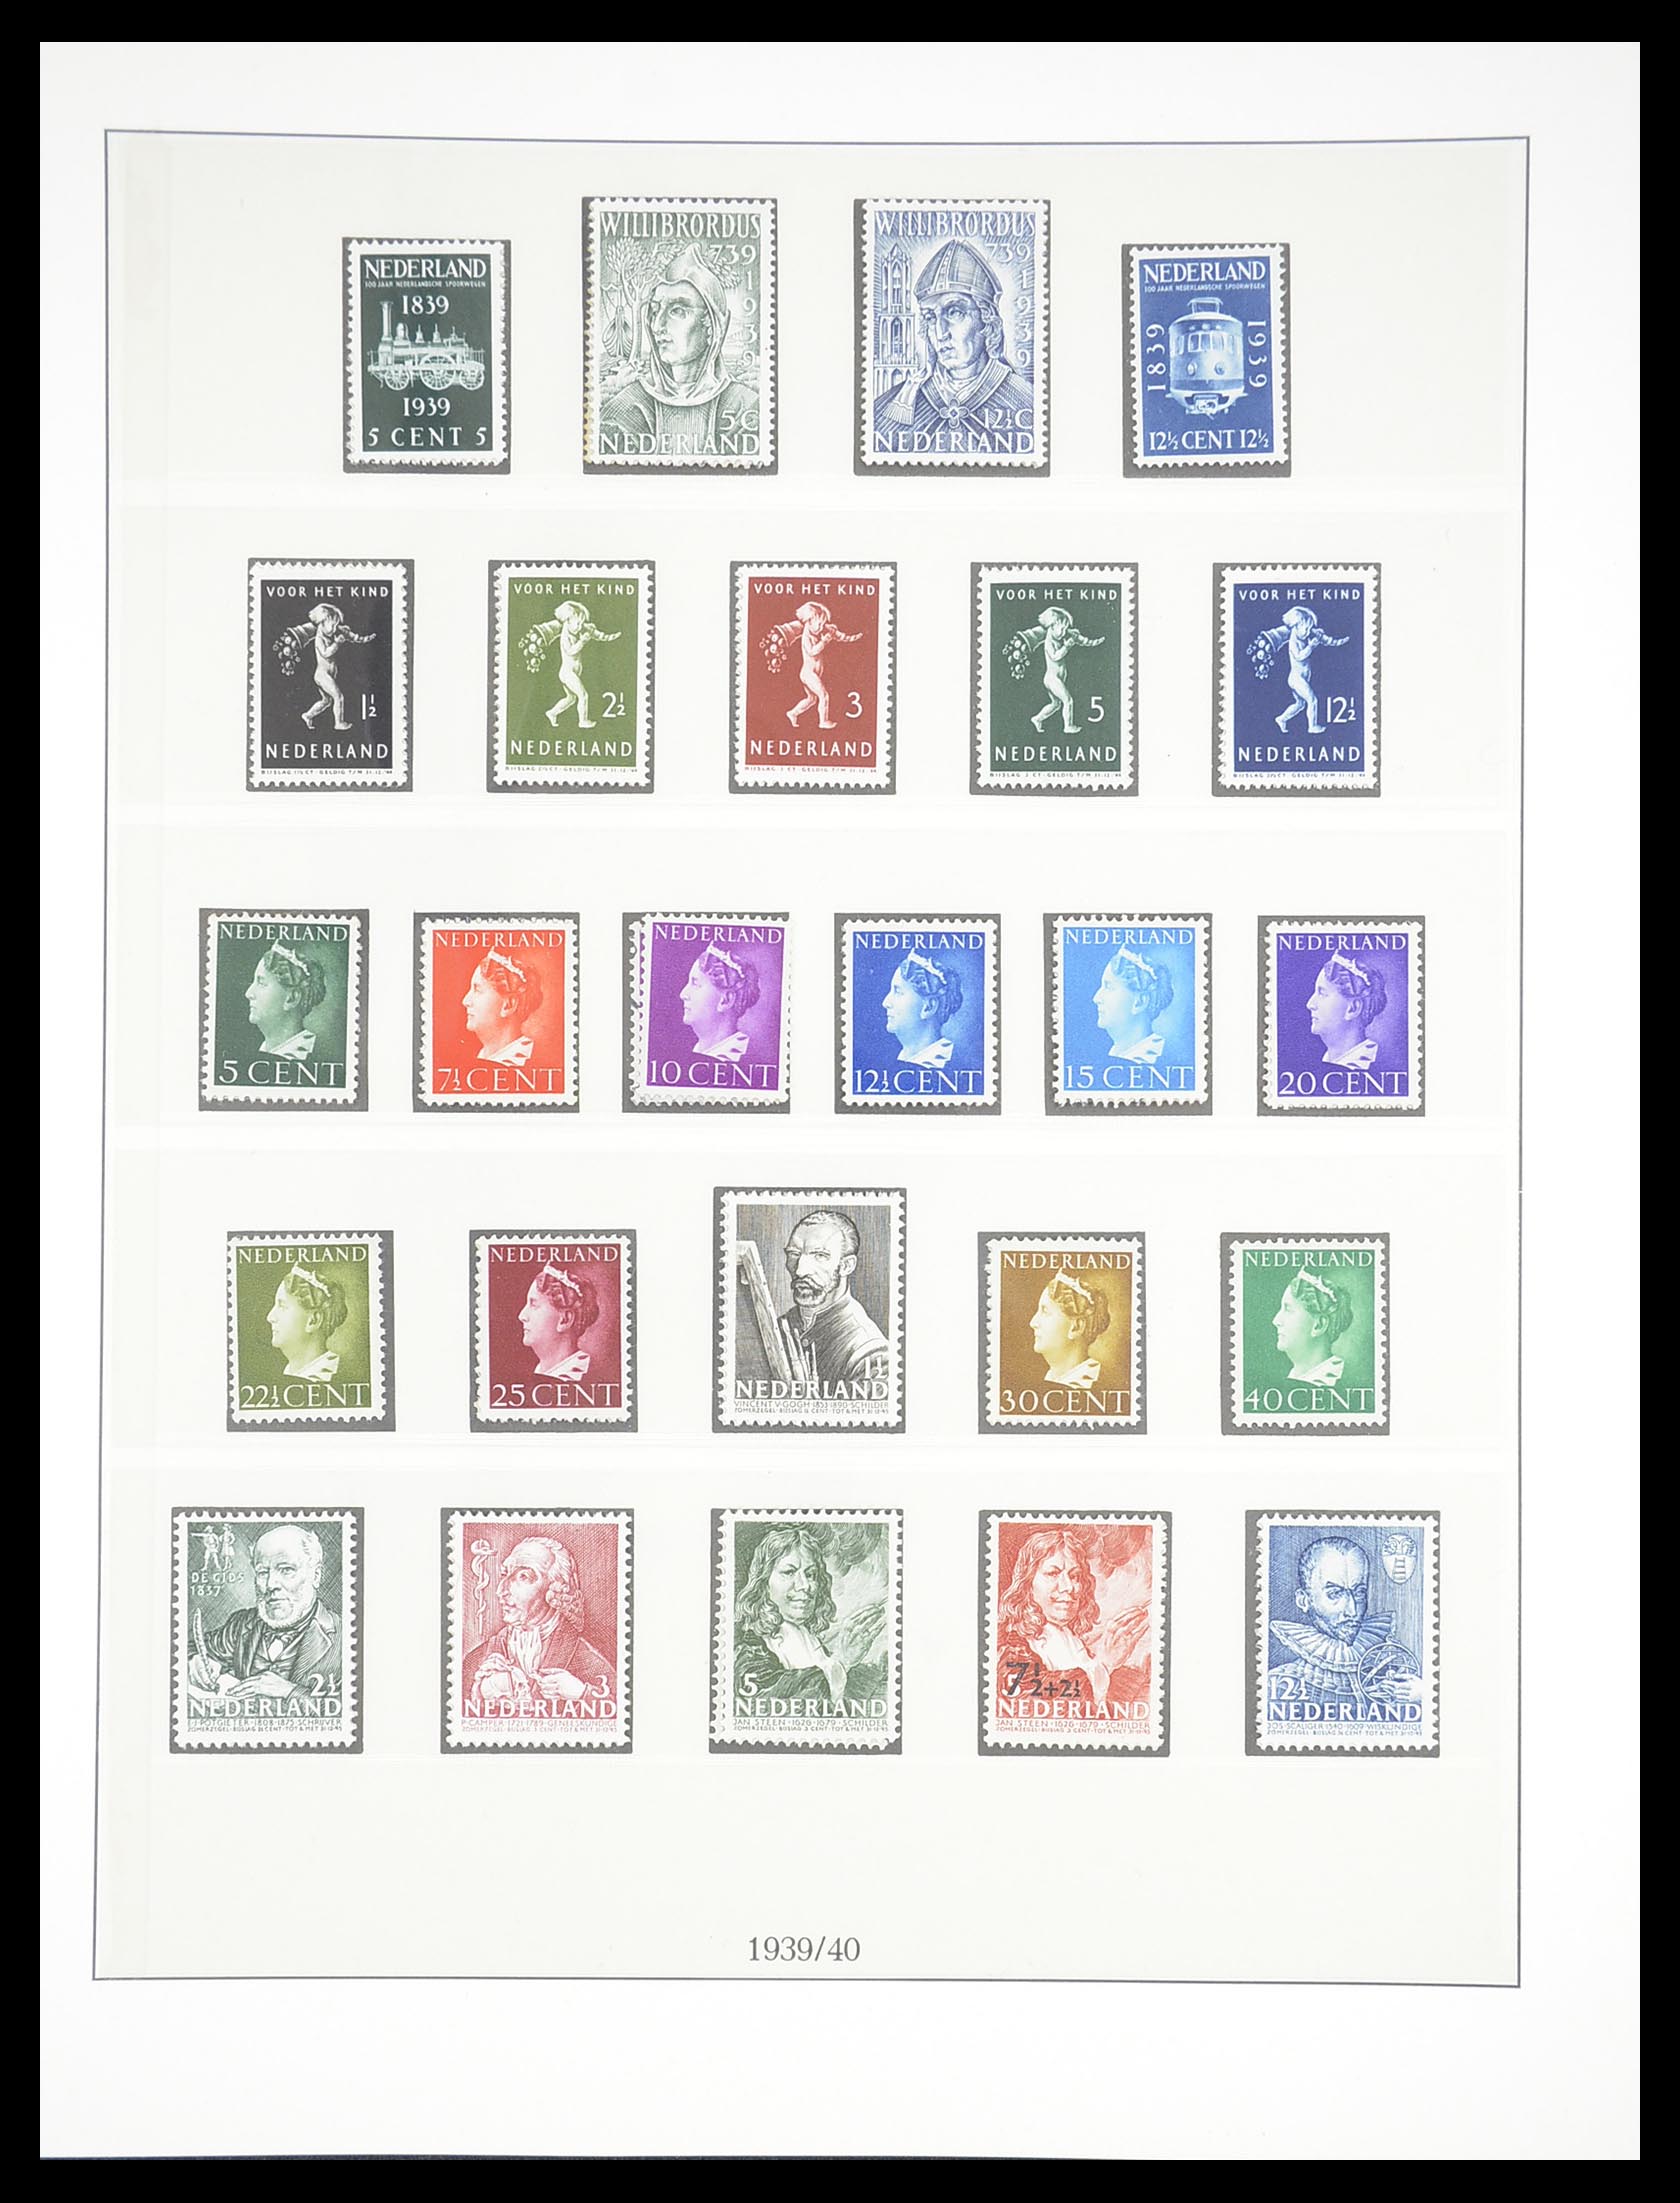 33189 033 - Stamp collection 33189 European countries 1850-1950.